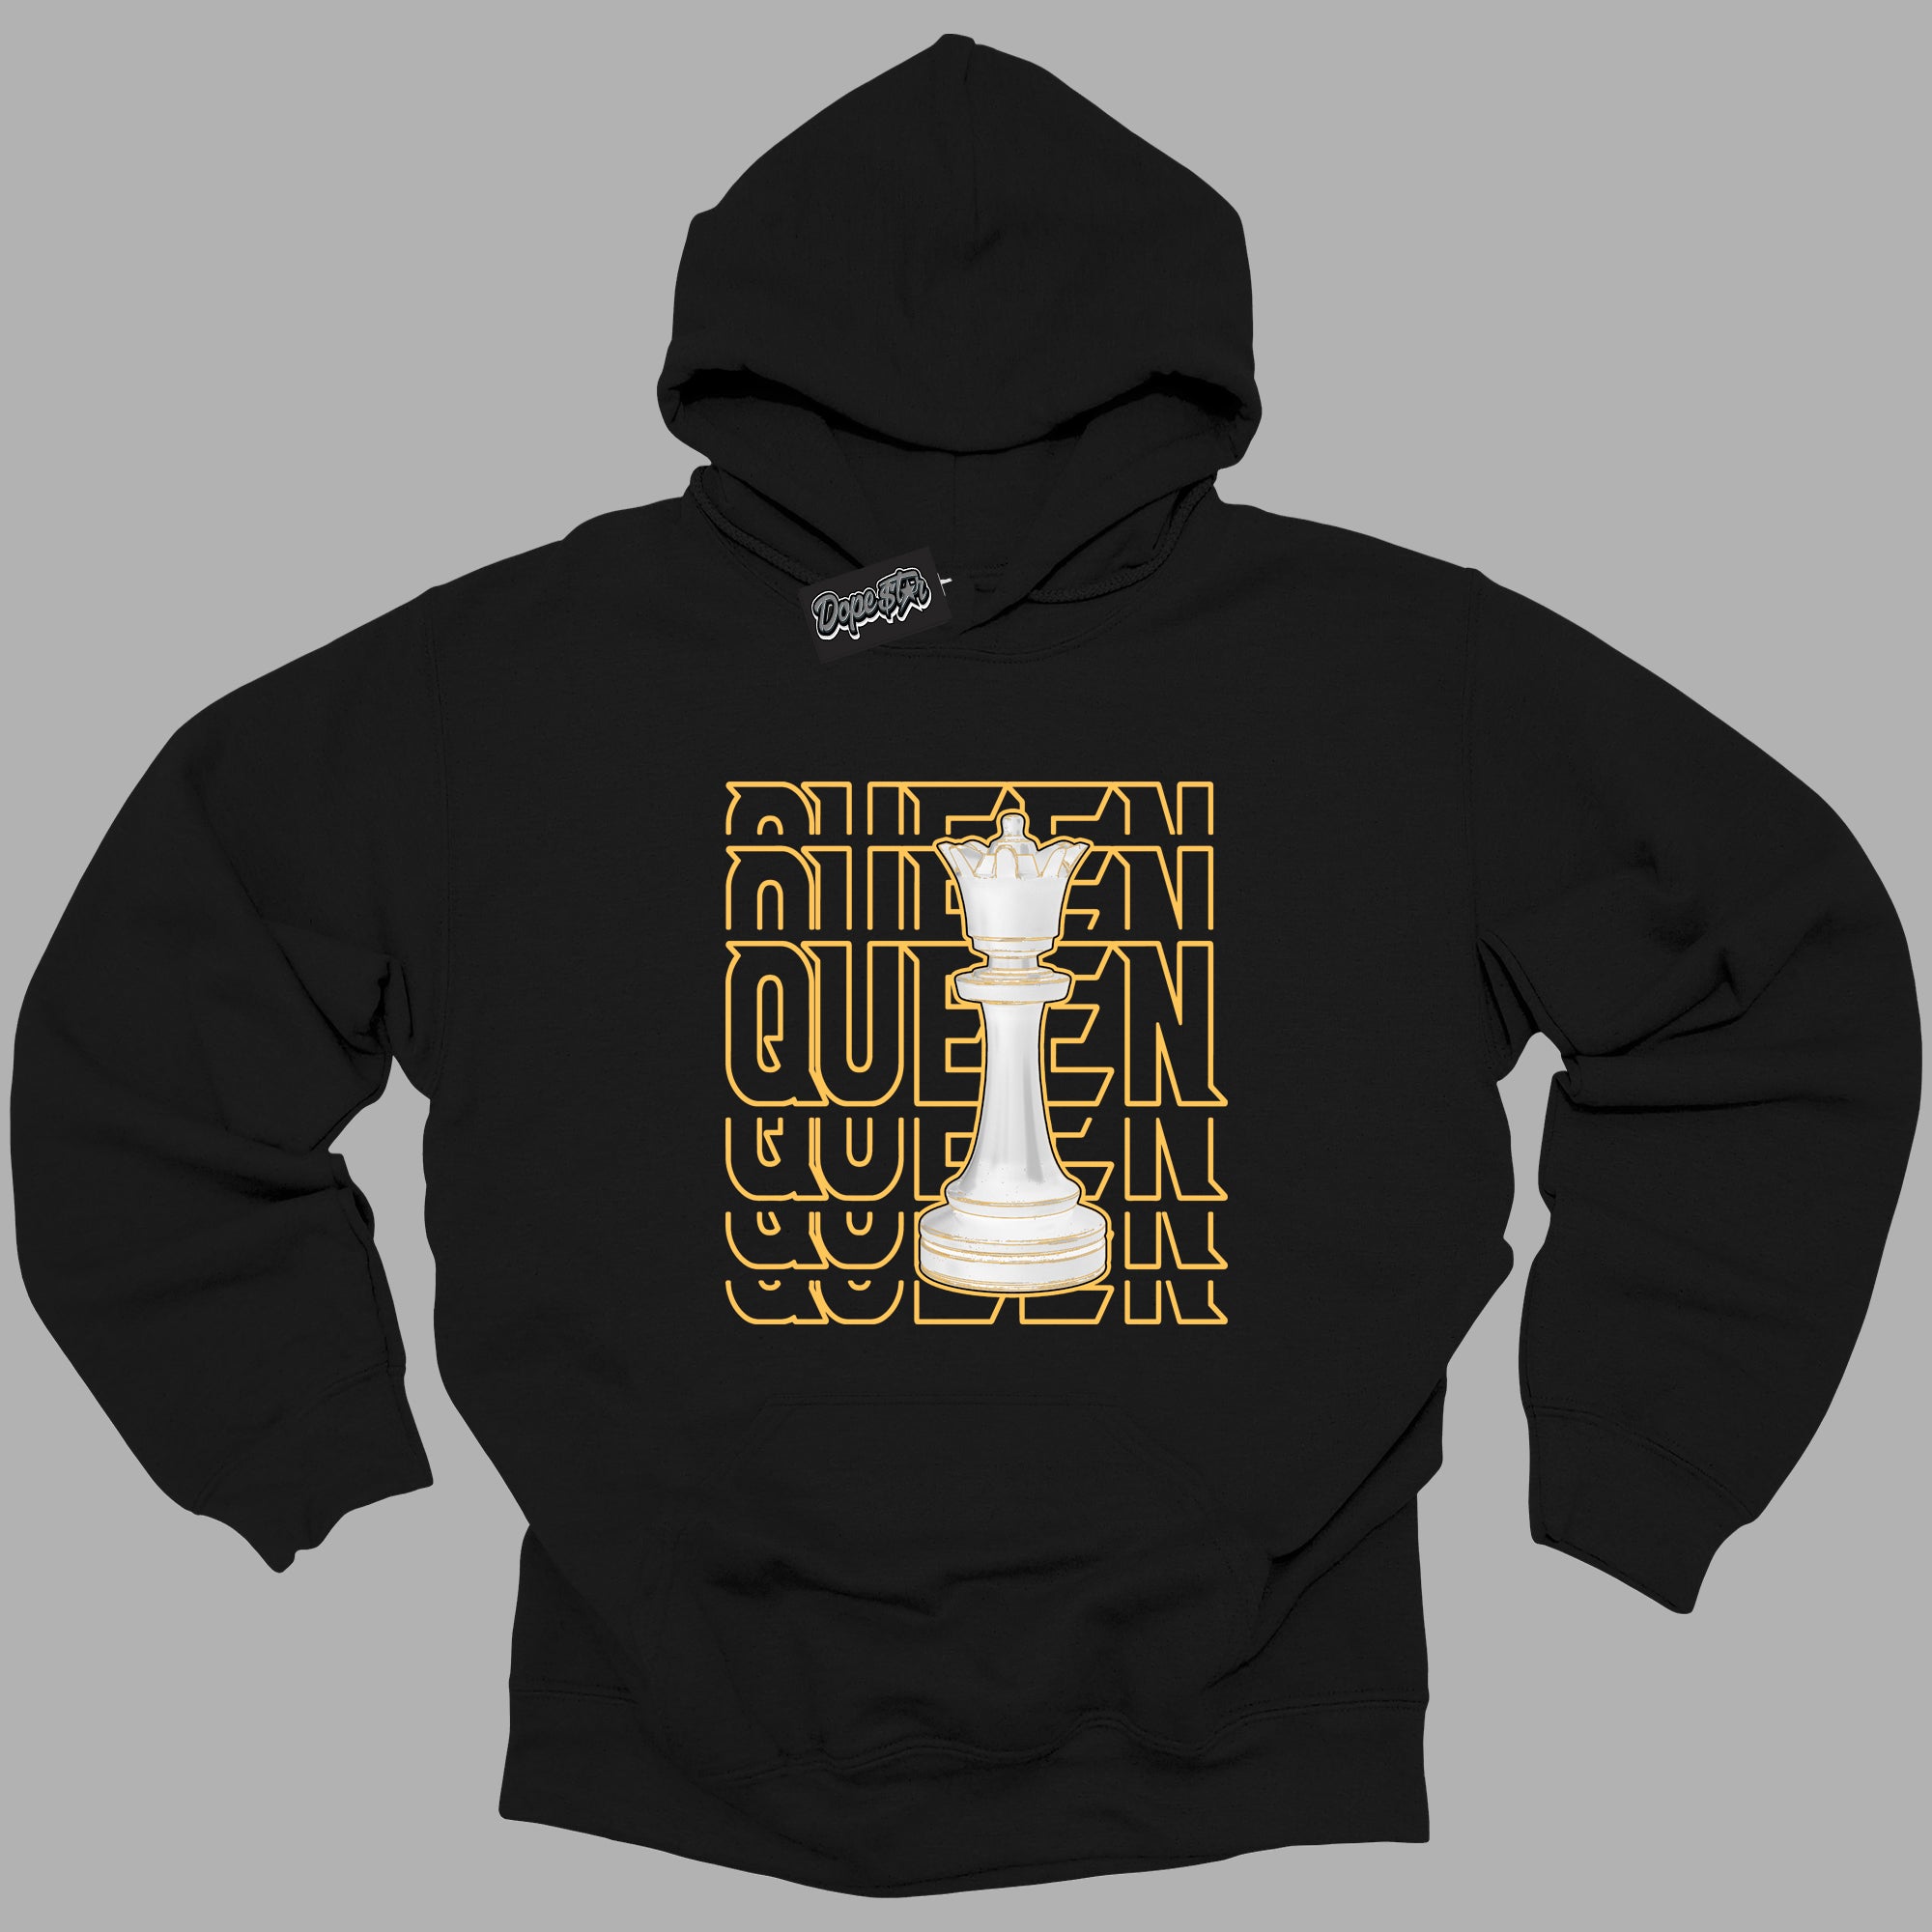 Cool Black Hoodie with “ Queen Chess ”  design that Perfectly Matches Yellow Ochre 6s Sneakers.